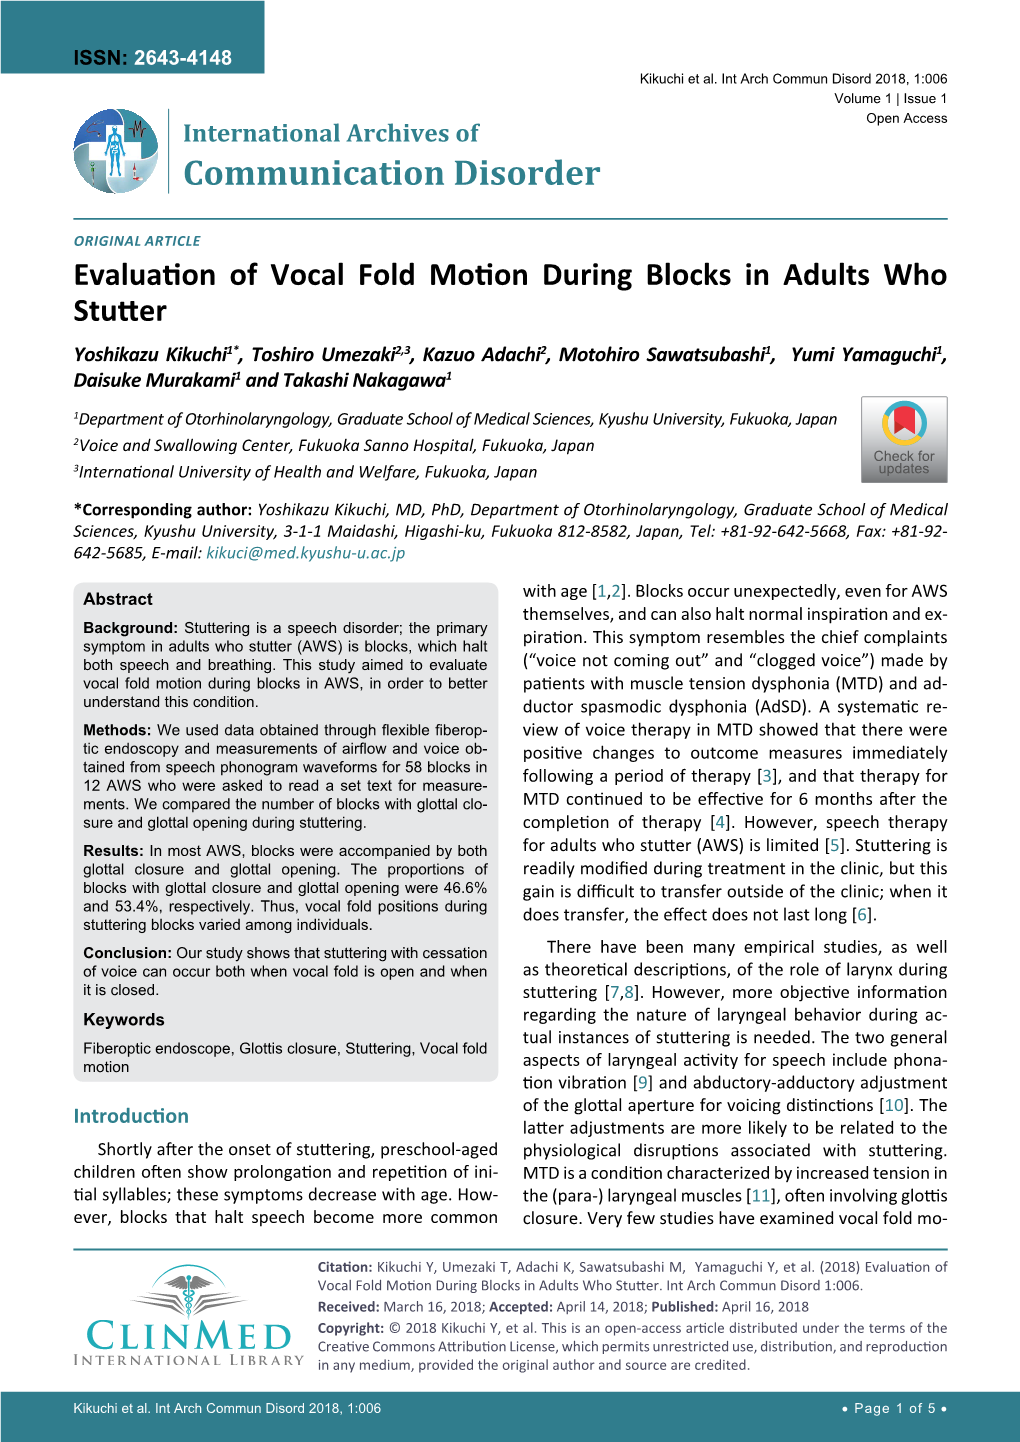 Evaluation of Vocal Fold Motion During Blocks in Adults Who Stutter